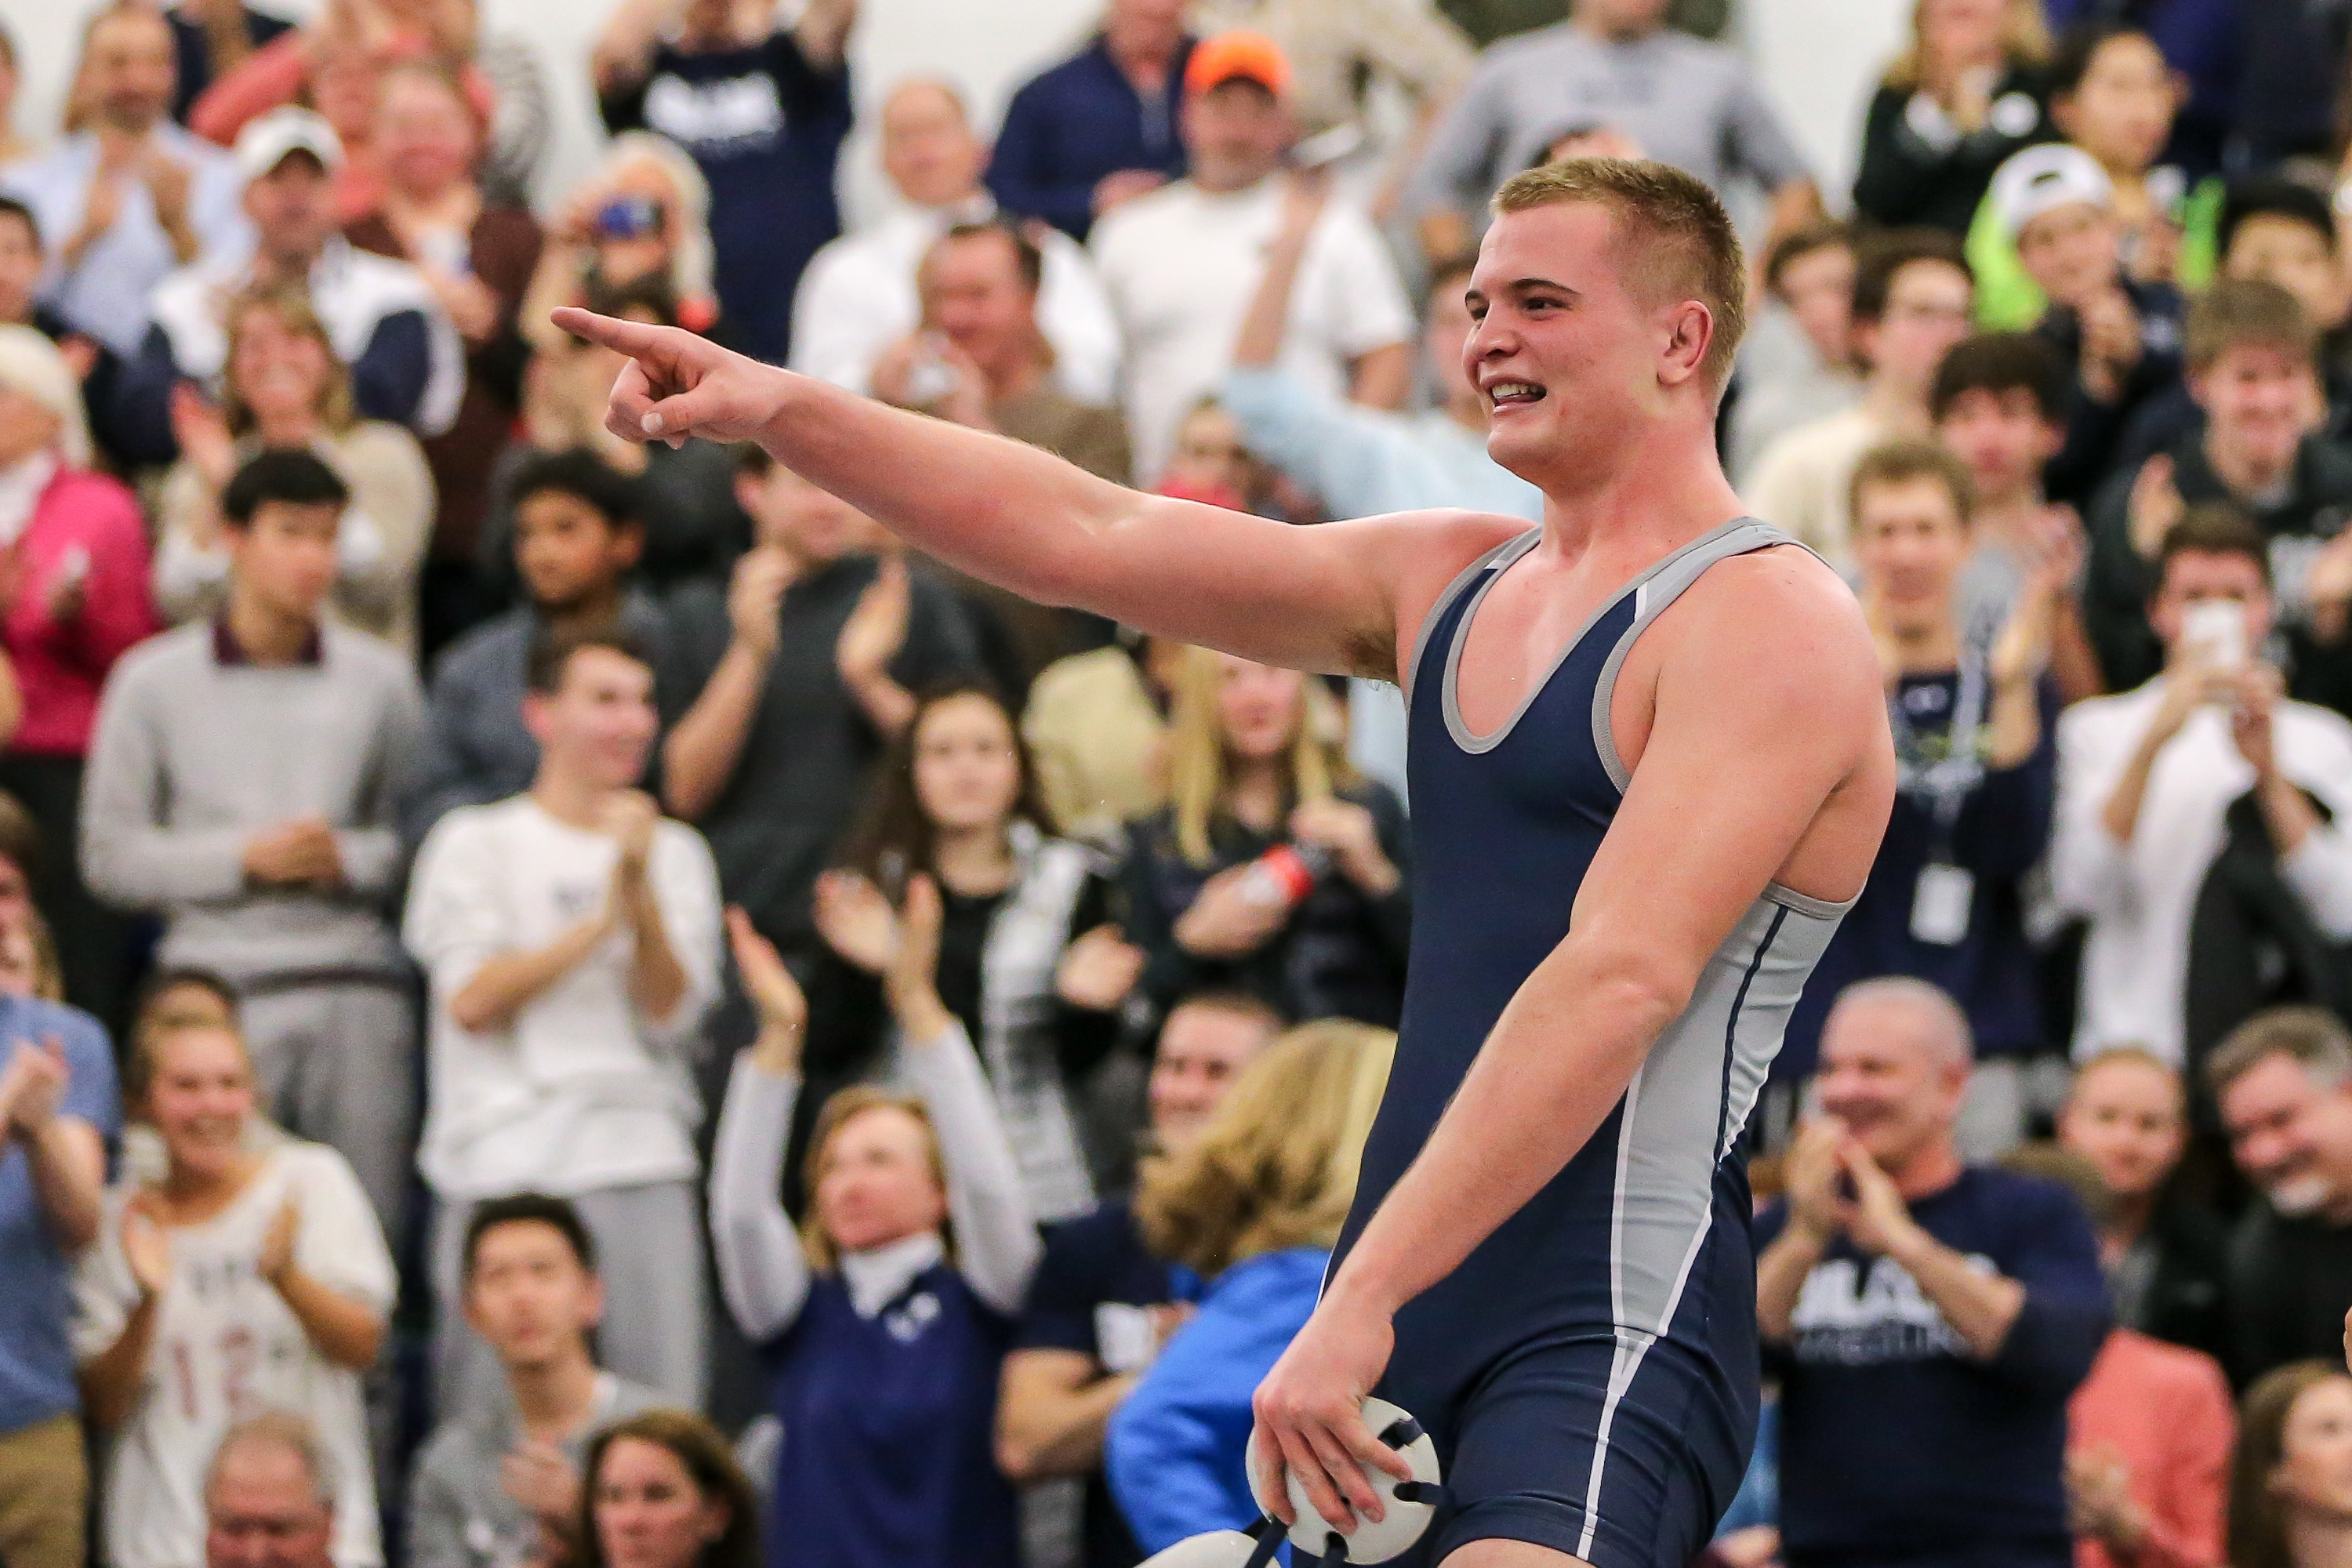 1/24/16 12:39:37 PM -- Blairstown, NJ, U.S.A -- Blair Academy vs. Wyoming Seminary high school wrestling. Blair Academy Junior Chase Singletary , shown, celebrates his 3-1 victory over Wyoming Seminary Senior Nick Reenan in the 195 match. Blair Academy won, 35-20. Photo by Vincent Carchietta/USA TODAY Sports Images, Gannett ORG XMIT: US 134401 prep wrestling 1/23/2 [Via MerlinFTP Drop]